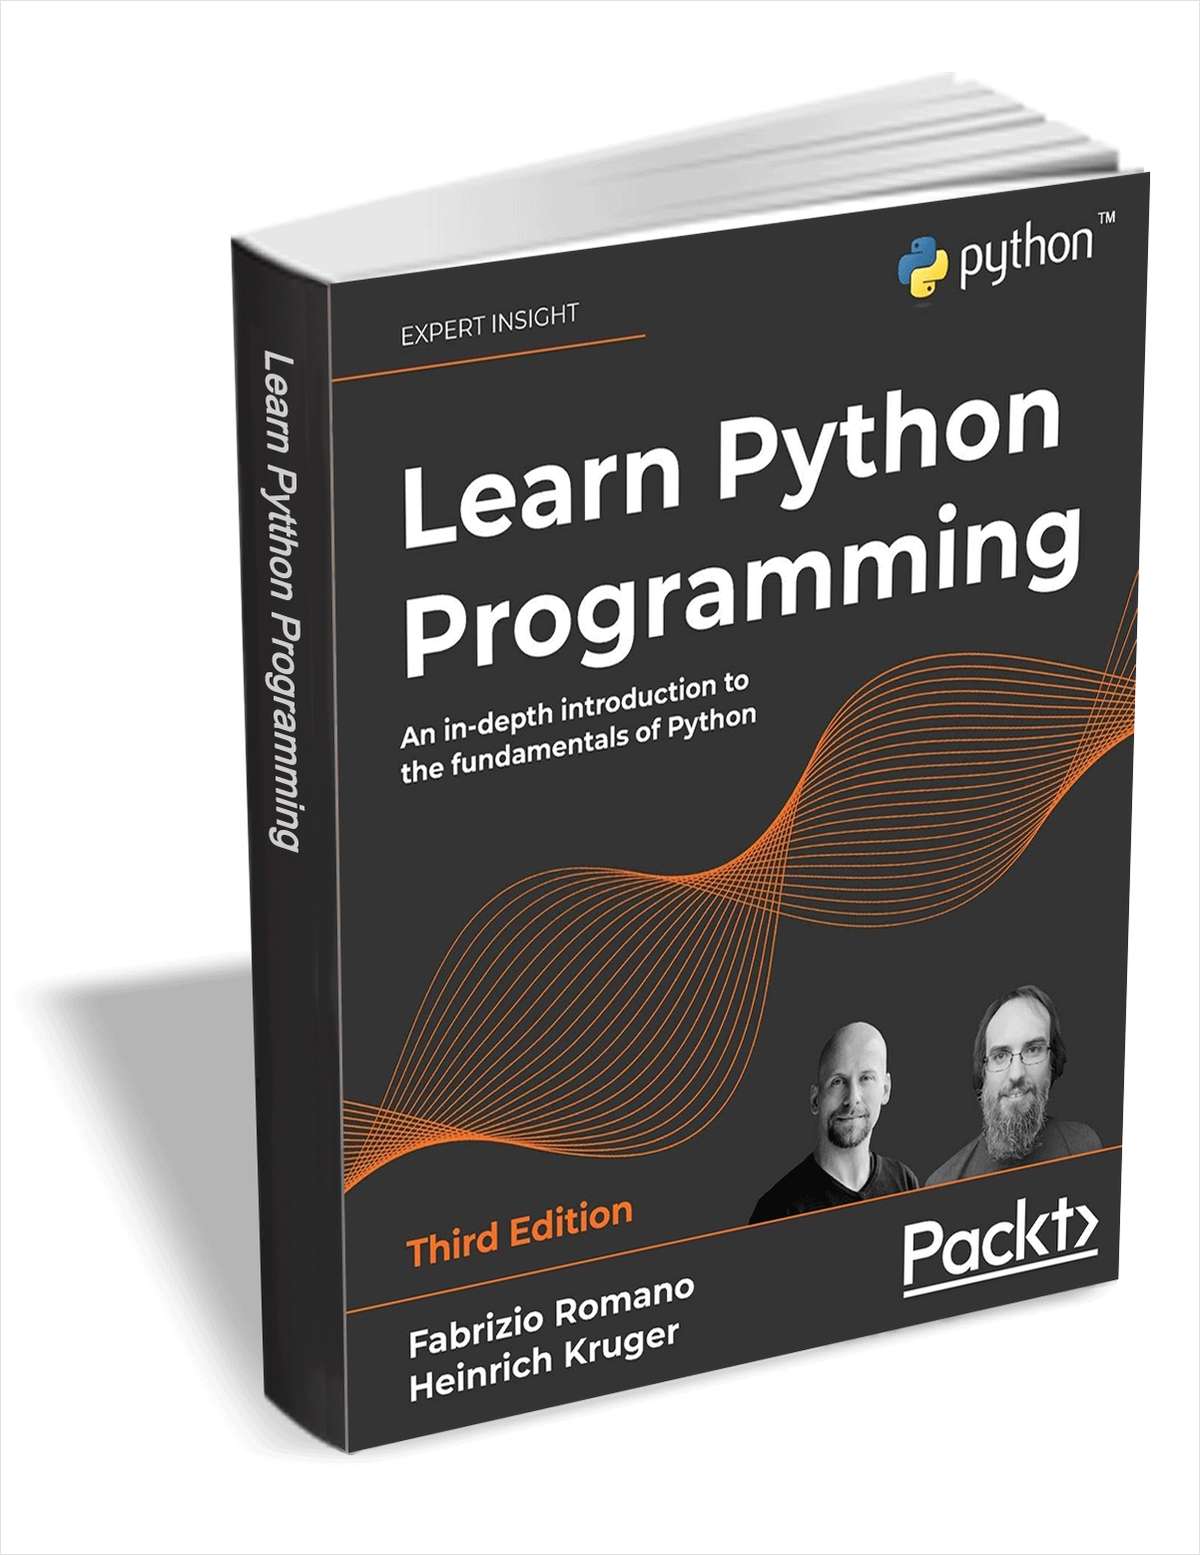 Learn Python Programming - Third Edition ($37.99 Value) FREE for a Limited Time